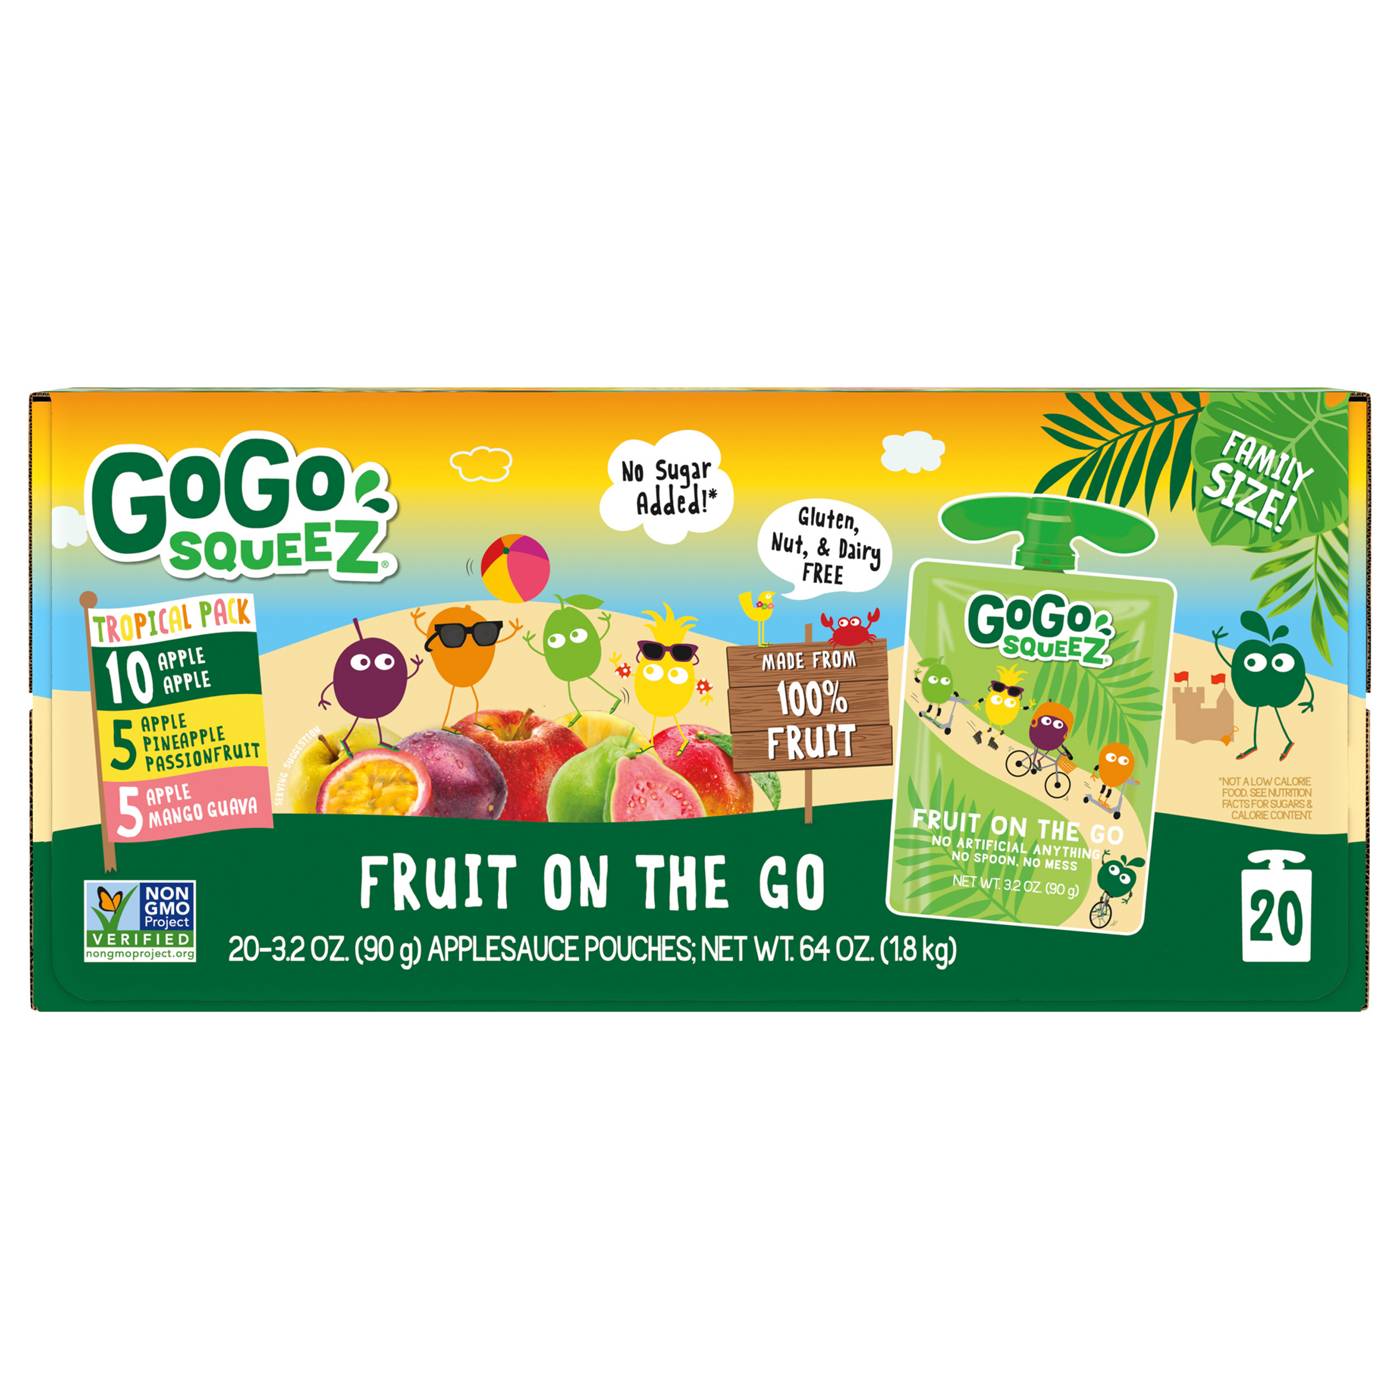 GoGo squeeZ Tropical Fruit on the Go Variety Pack; image 1 of 3